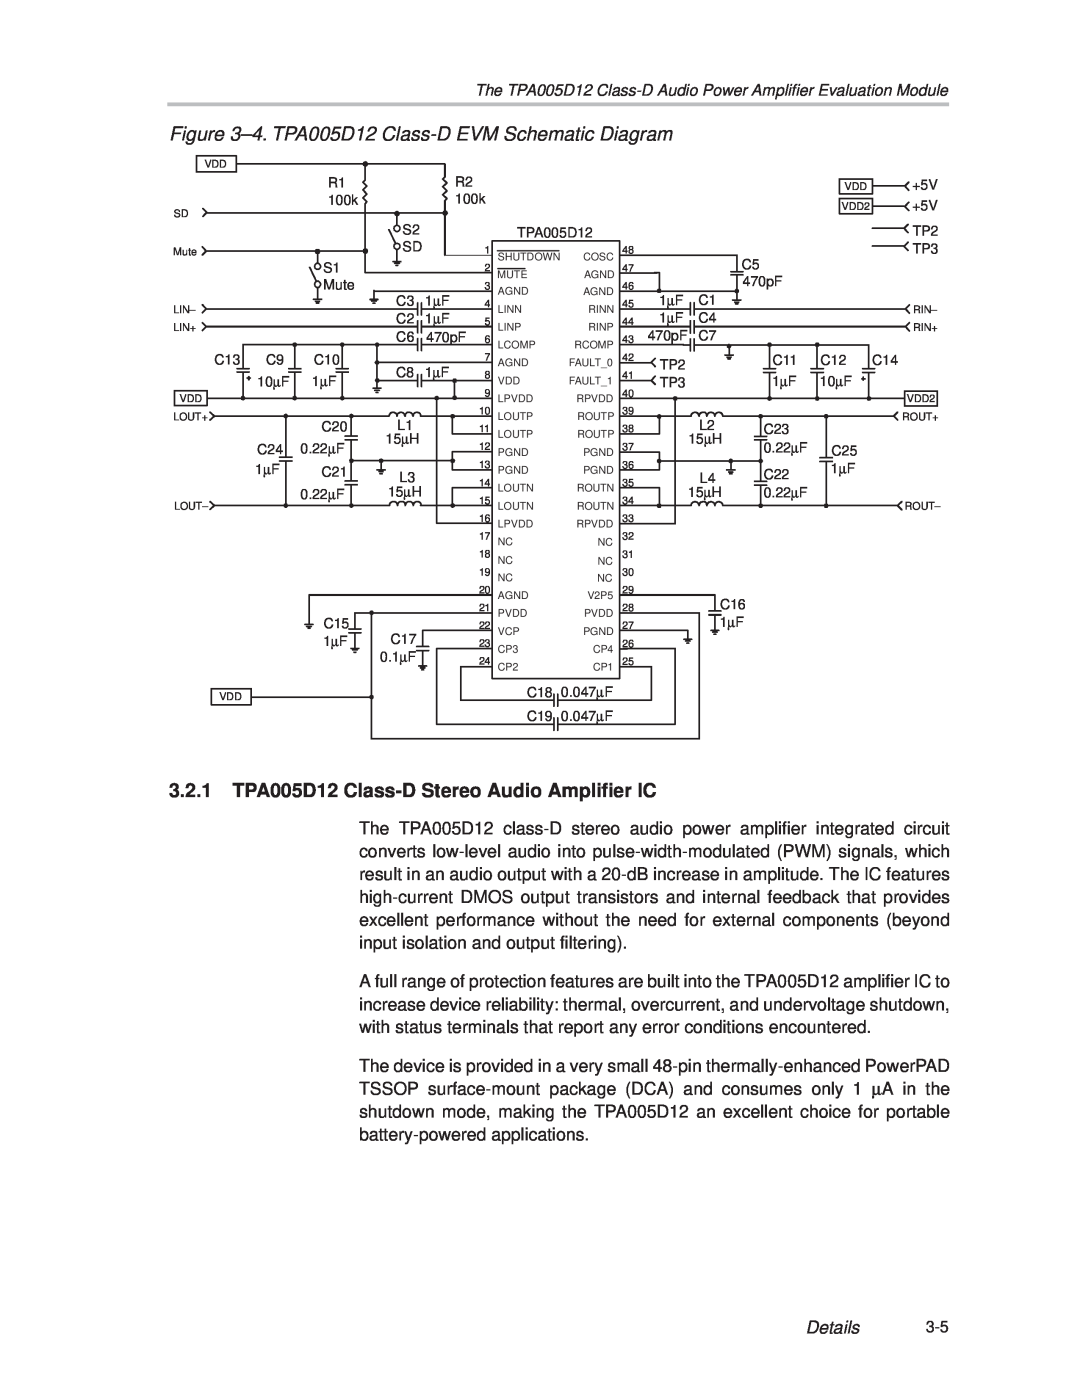 Texas Instruments manual 3.2.1TPA005D12 Class-DStereo Audio Amplifier IC, Details 